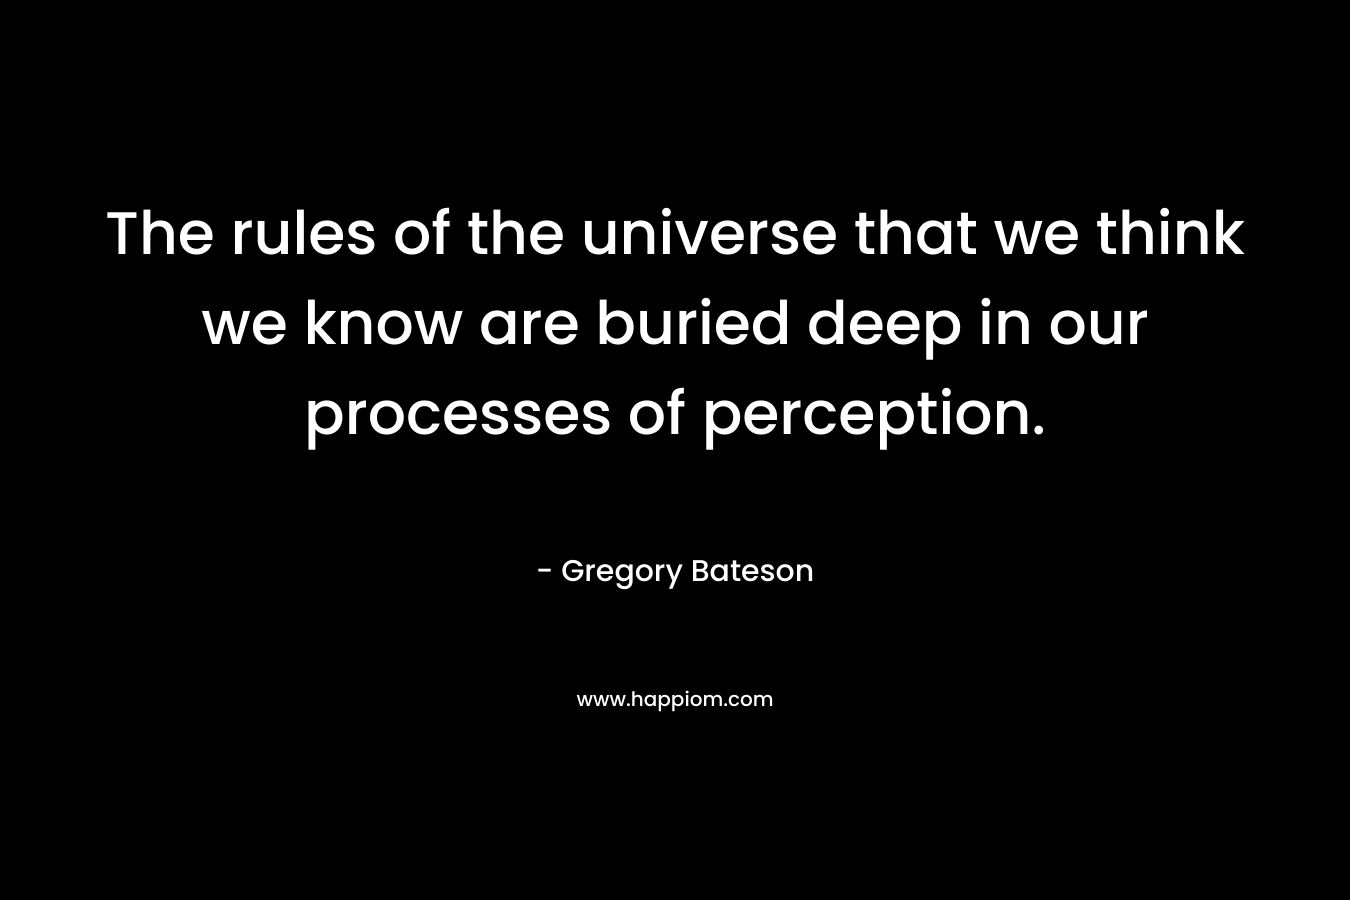 The rules of the universe that we think we know are buried deep in our processes of perception. – Gregory Bateson